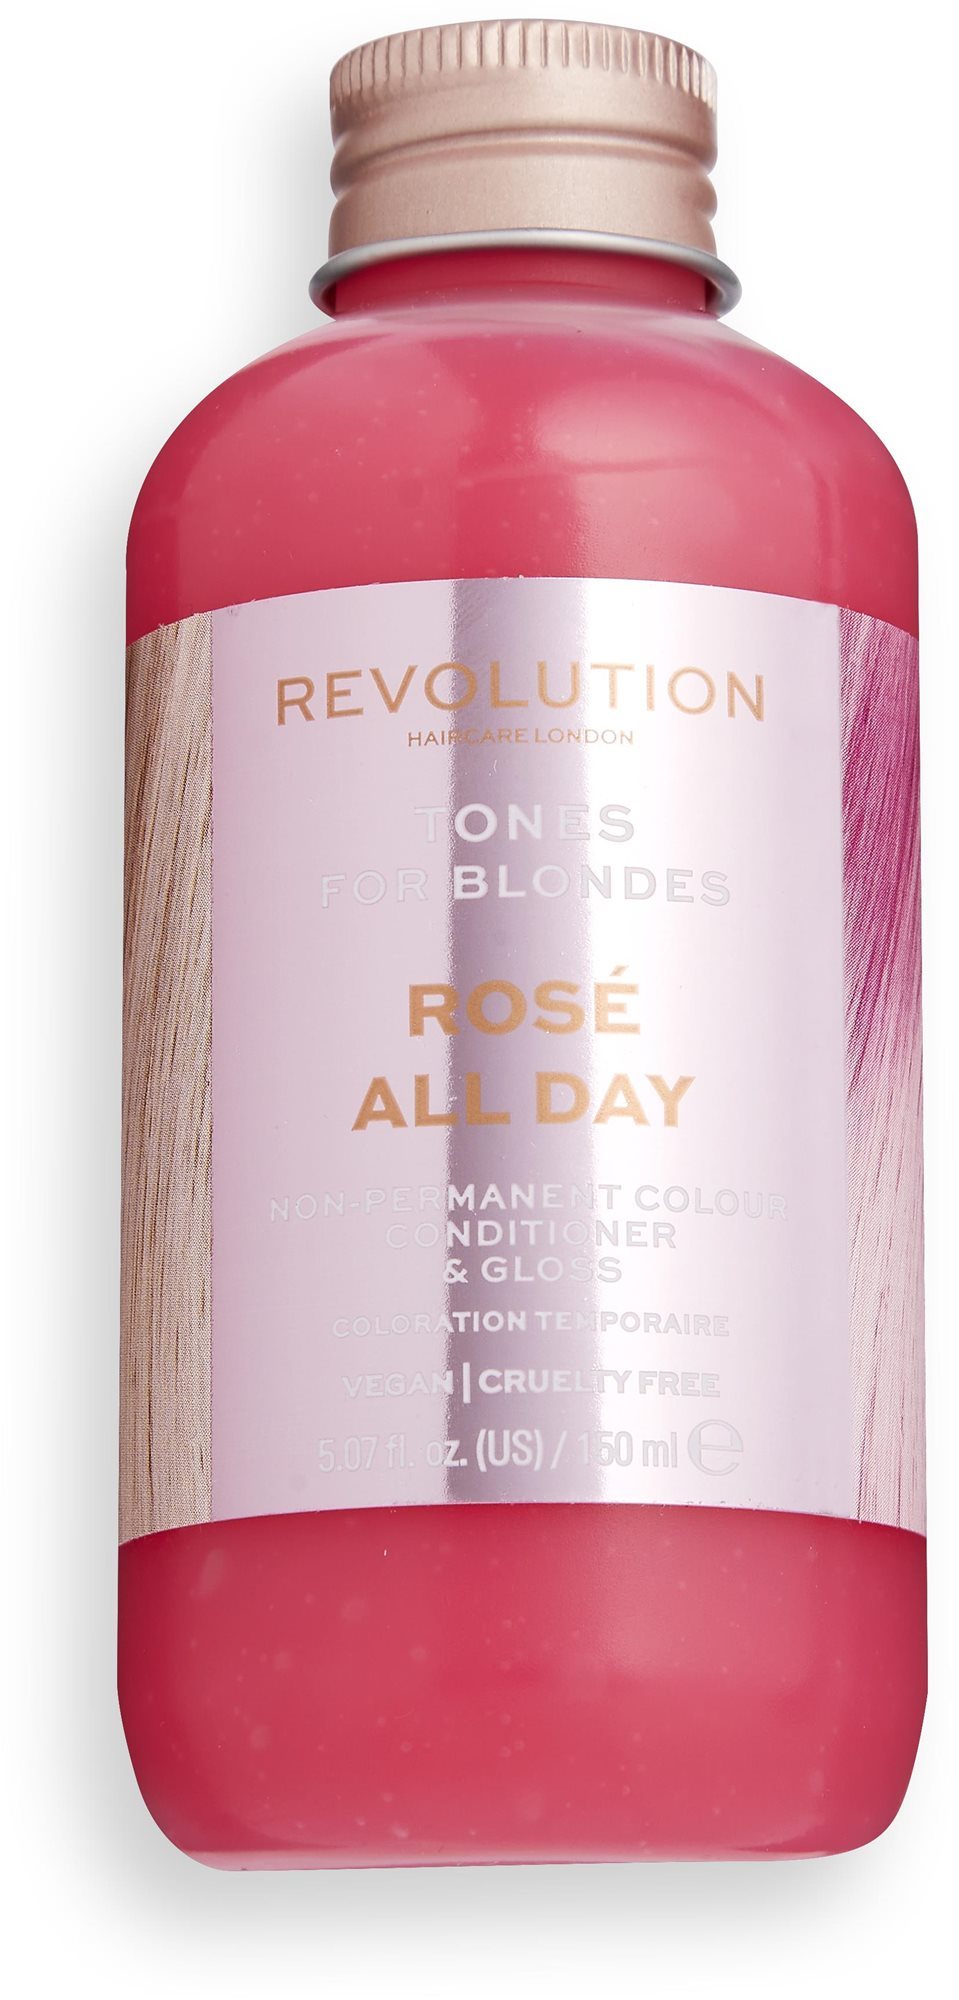 REVOLUTION HAIRCARE Tones for Blondes Rose All Day 150 ml